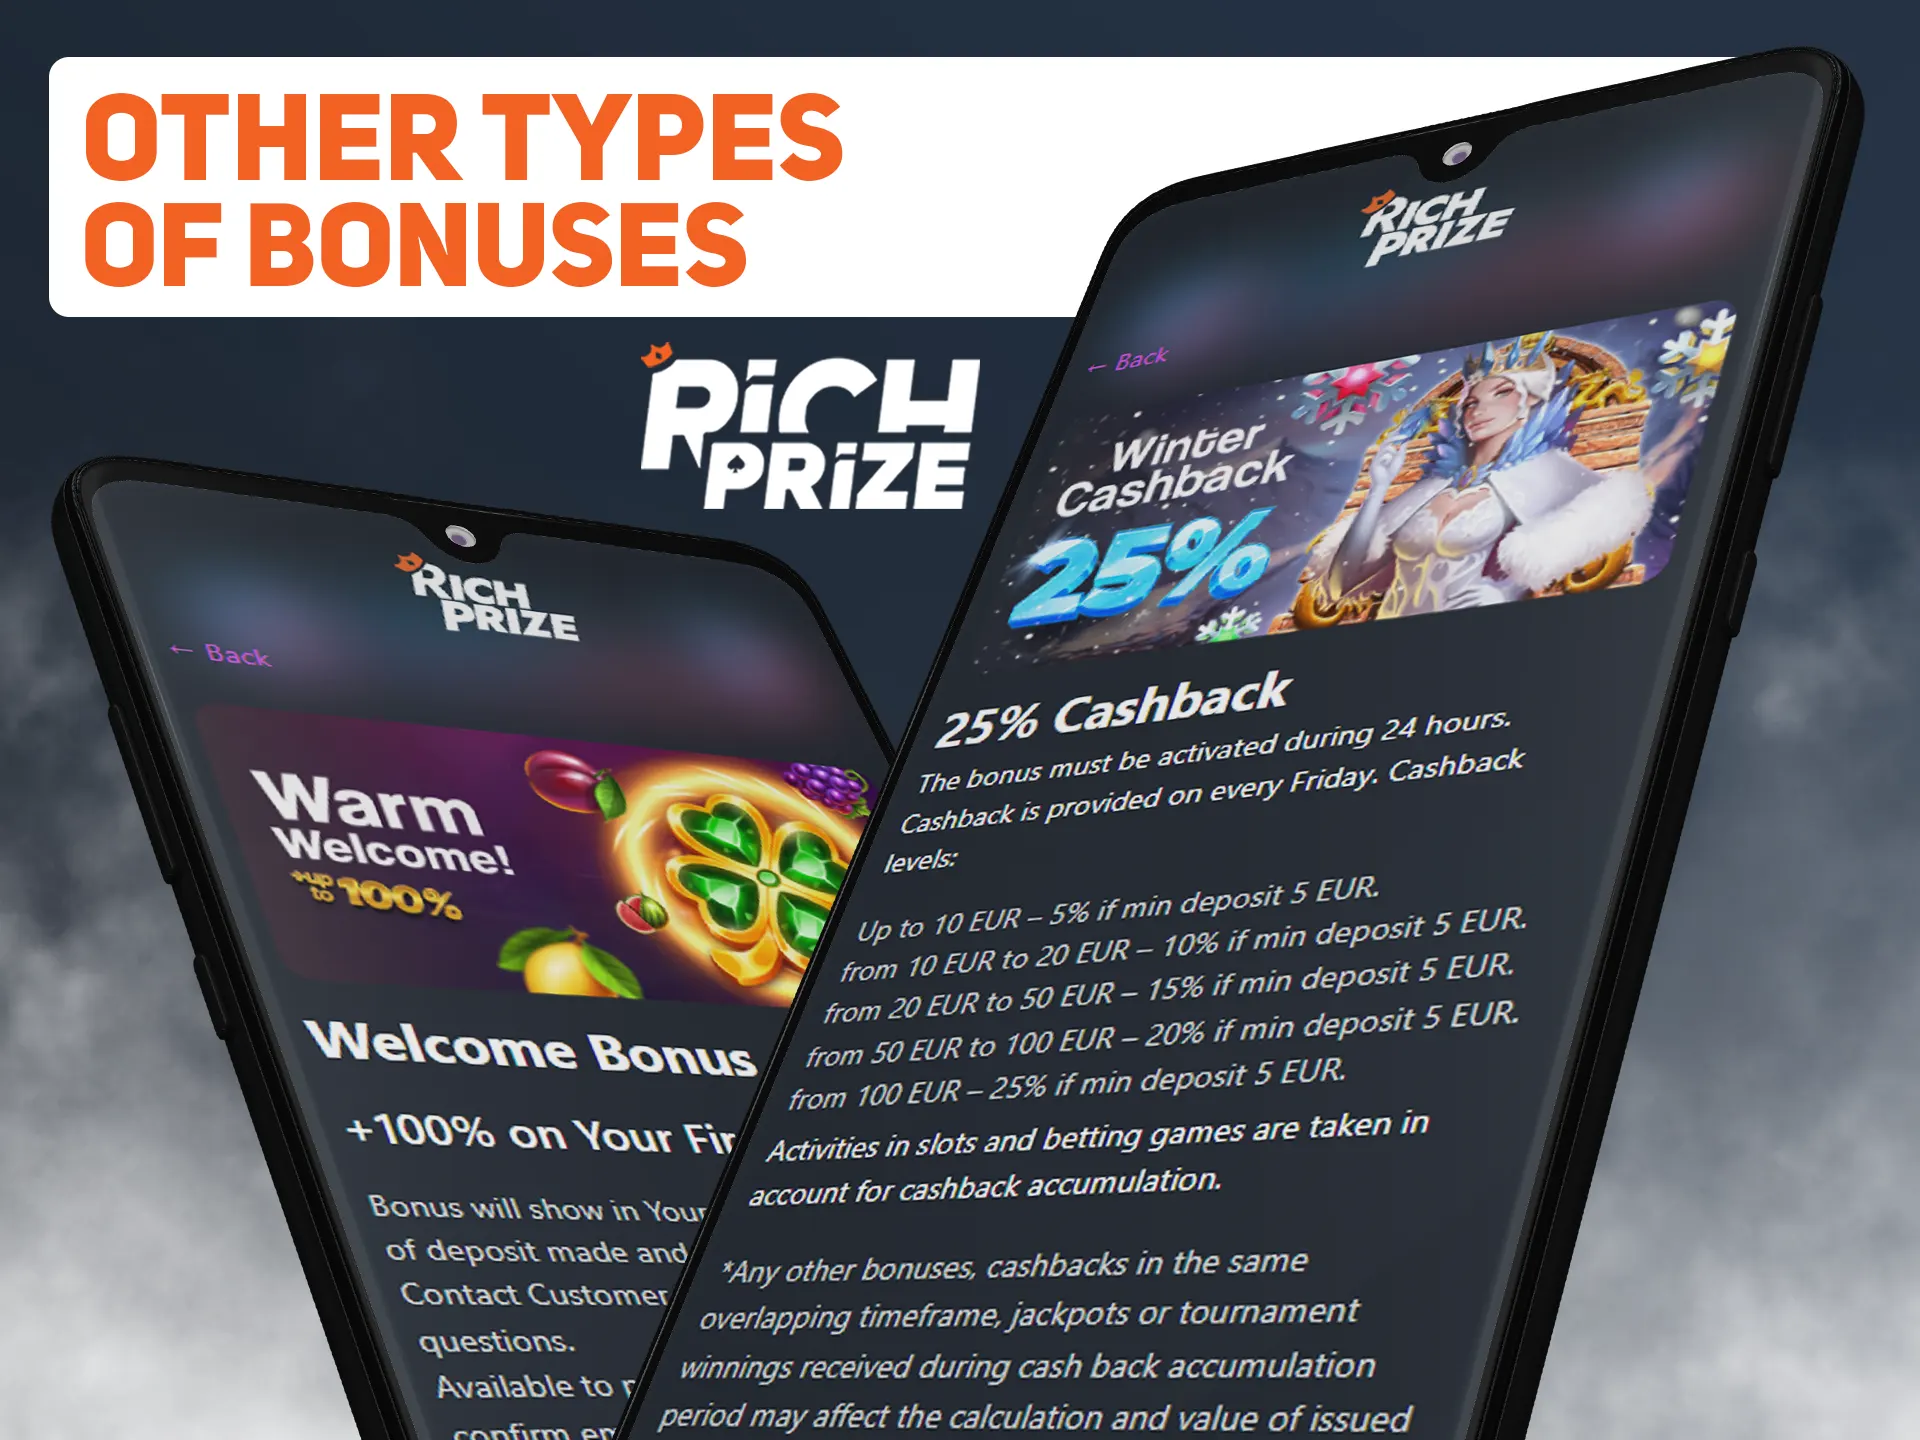 Learn more about types of bonuses at Richprize.